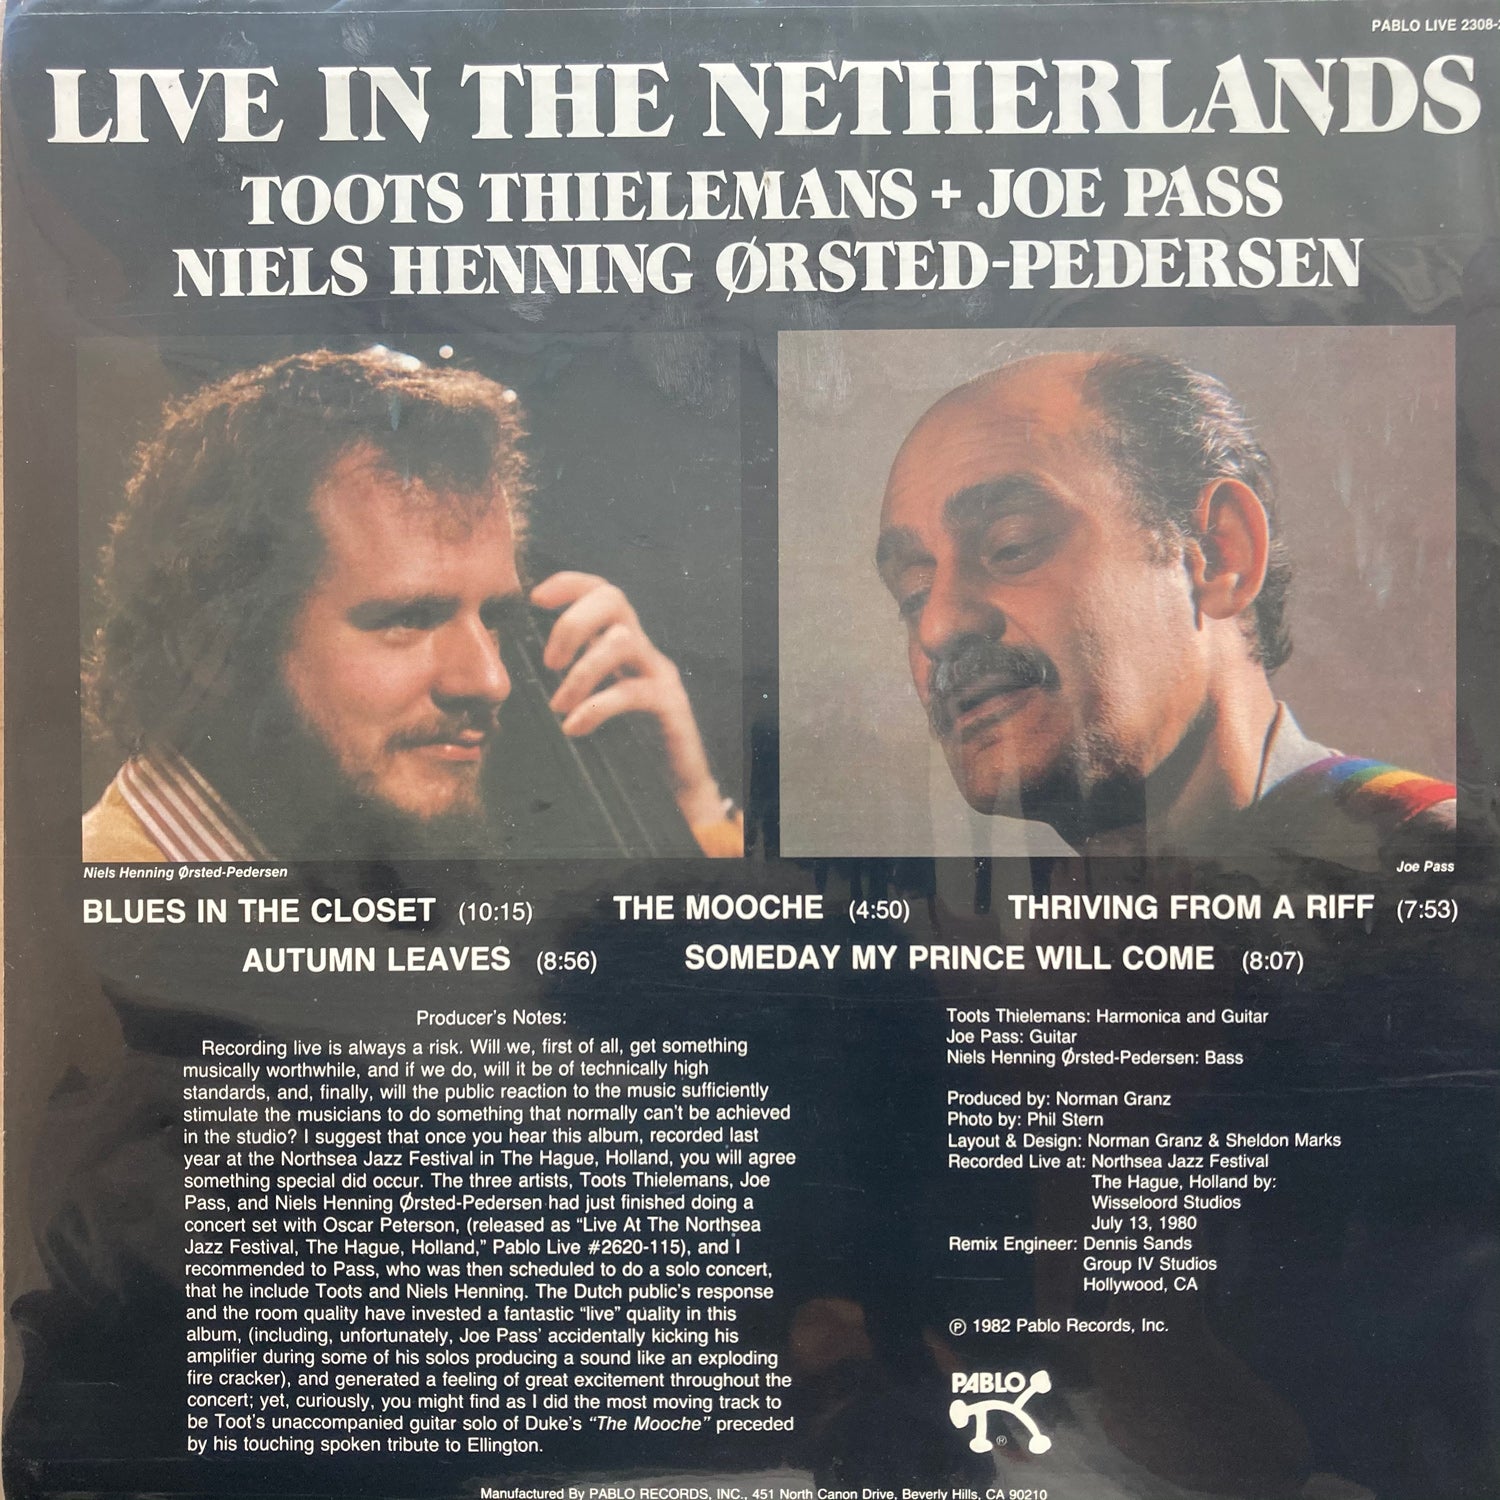 Toots Thielemans & Joe Pass - Live in the Netherlands